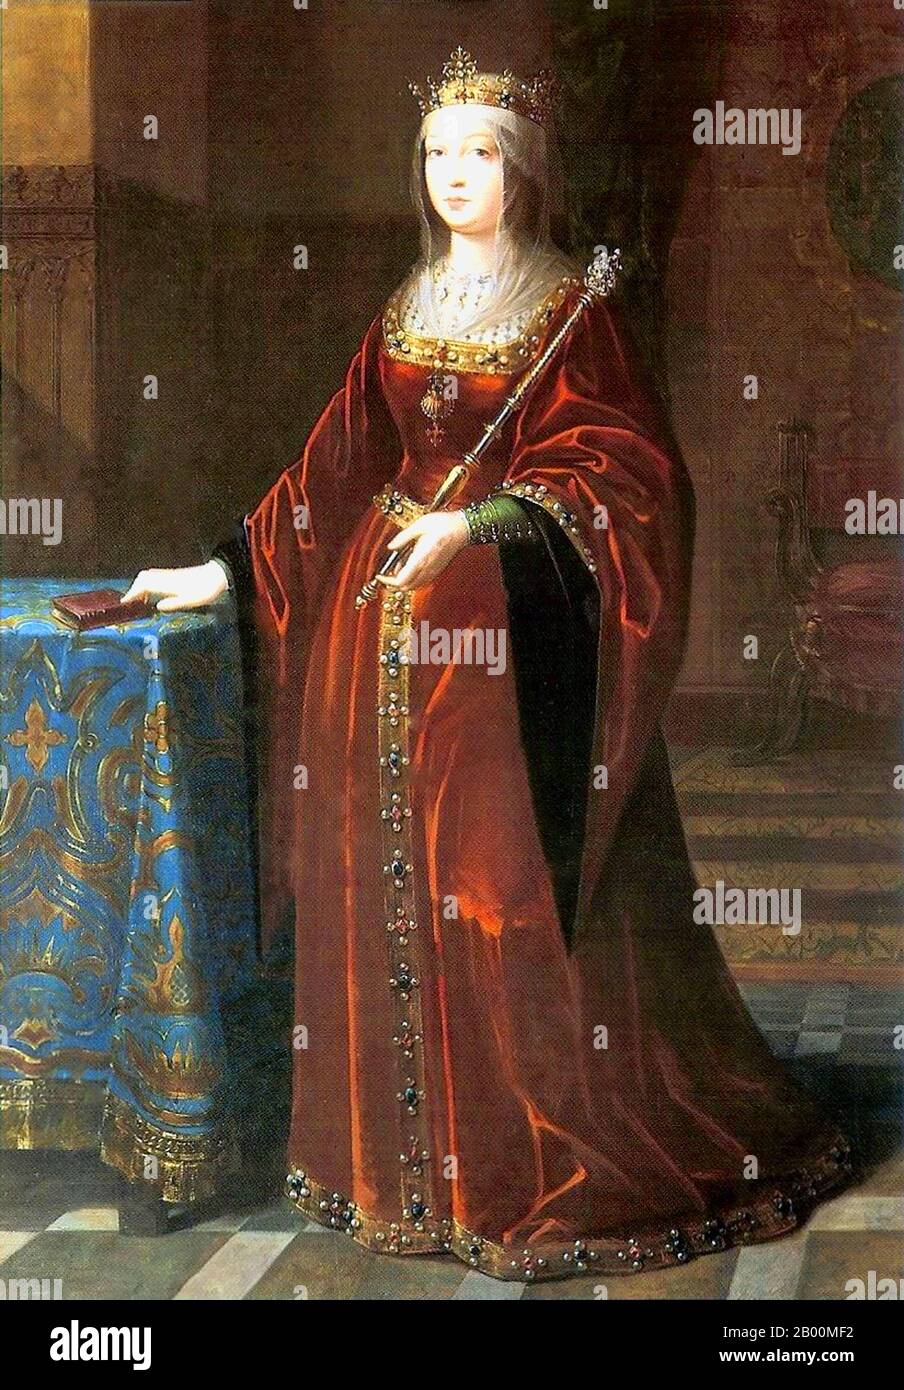 Spain: 'Isabella I (1451-1504), Queen of Castile and Leon'. Oil on canvas painting by Luis de Madrazo (1825-1897), c. 1848.  Isabella I (Spanish: Isabel I, Ysabel, anglicised as Elizabeth) (22 April 1451-26 November 1504) was Queen of Castile and Leon. She and her husband Ferdinand II of Aragon brought stability to both kingdoms that became the basis for the unification of Spain. Later the two laid the foundation for the political unification of Spain under their grandson, Charles V, Holy Roman Emperor. Stock Photo